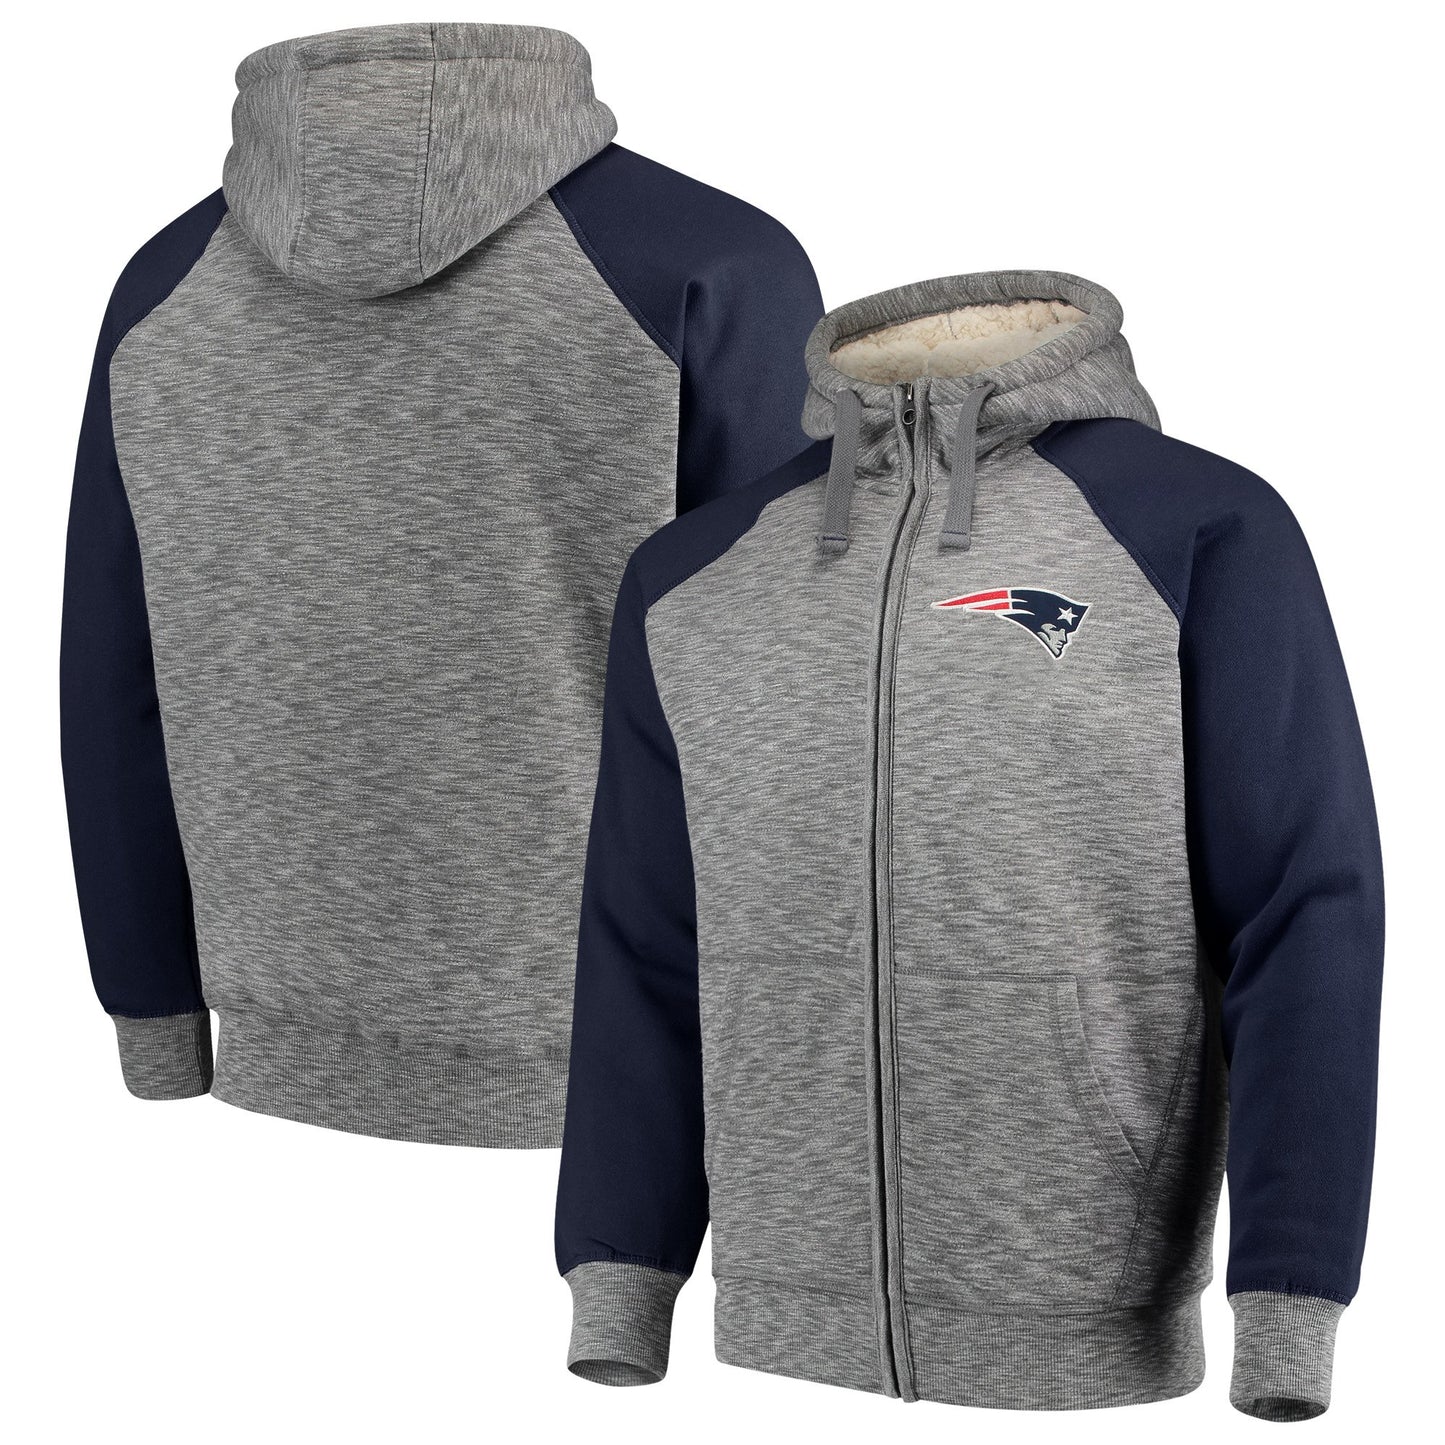 New England Patriots Heathered Gray/Blue Turning Point Hooded Jacket by G-III